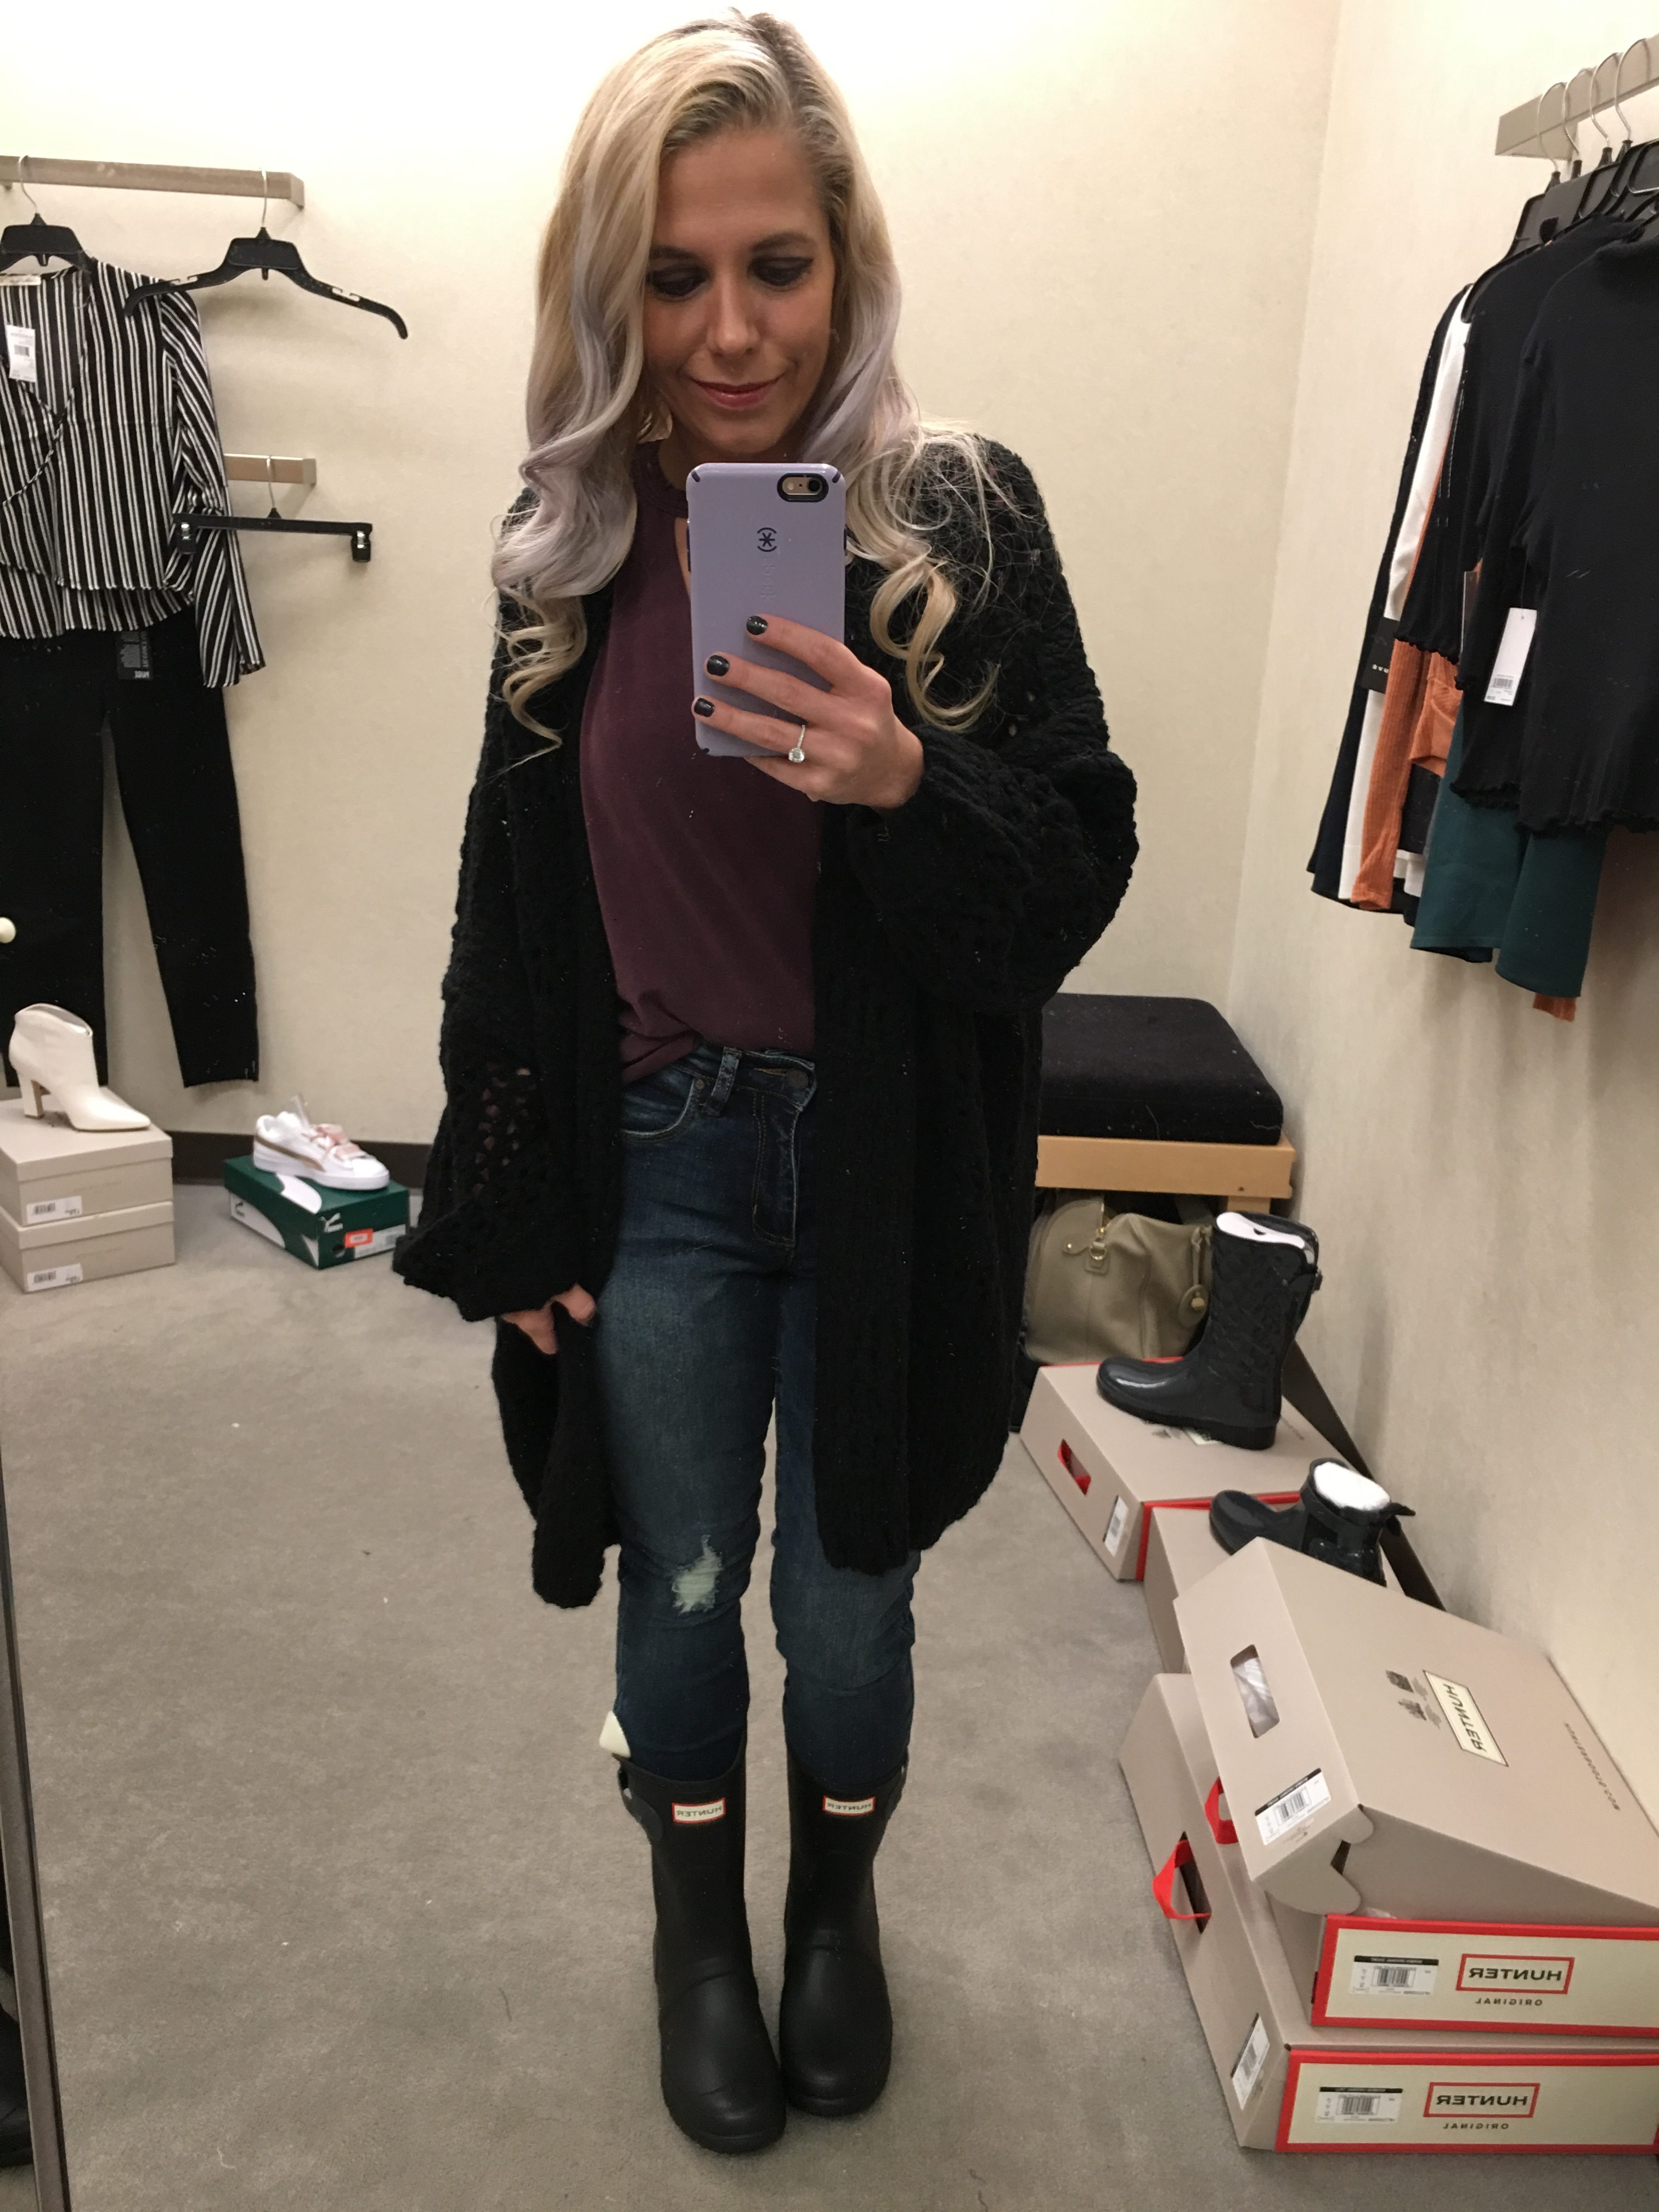 Nordstrom Anniversary Sale 2018 Try On Session Petite Fashion Blogger NSALE - Fashion Blogger COVET by tricia showcases top picks from the 2018 Nordstrom Anniversary Sale. This NSALE try on session shows how top NSALE picks look on petite build. Nordstrom Anniversary Sale Dressing Room Diaries include top picks like Hunter boots, Paige denim, cardigan, moto jackets, and more. #NSALE #Nordstrom #NordstromAnniversarySale #NSALE2018 #NordyGirl #WomensFashion #WomensStyle #FashionBlogger #StyleBlogger #KansasCity